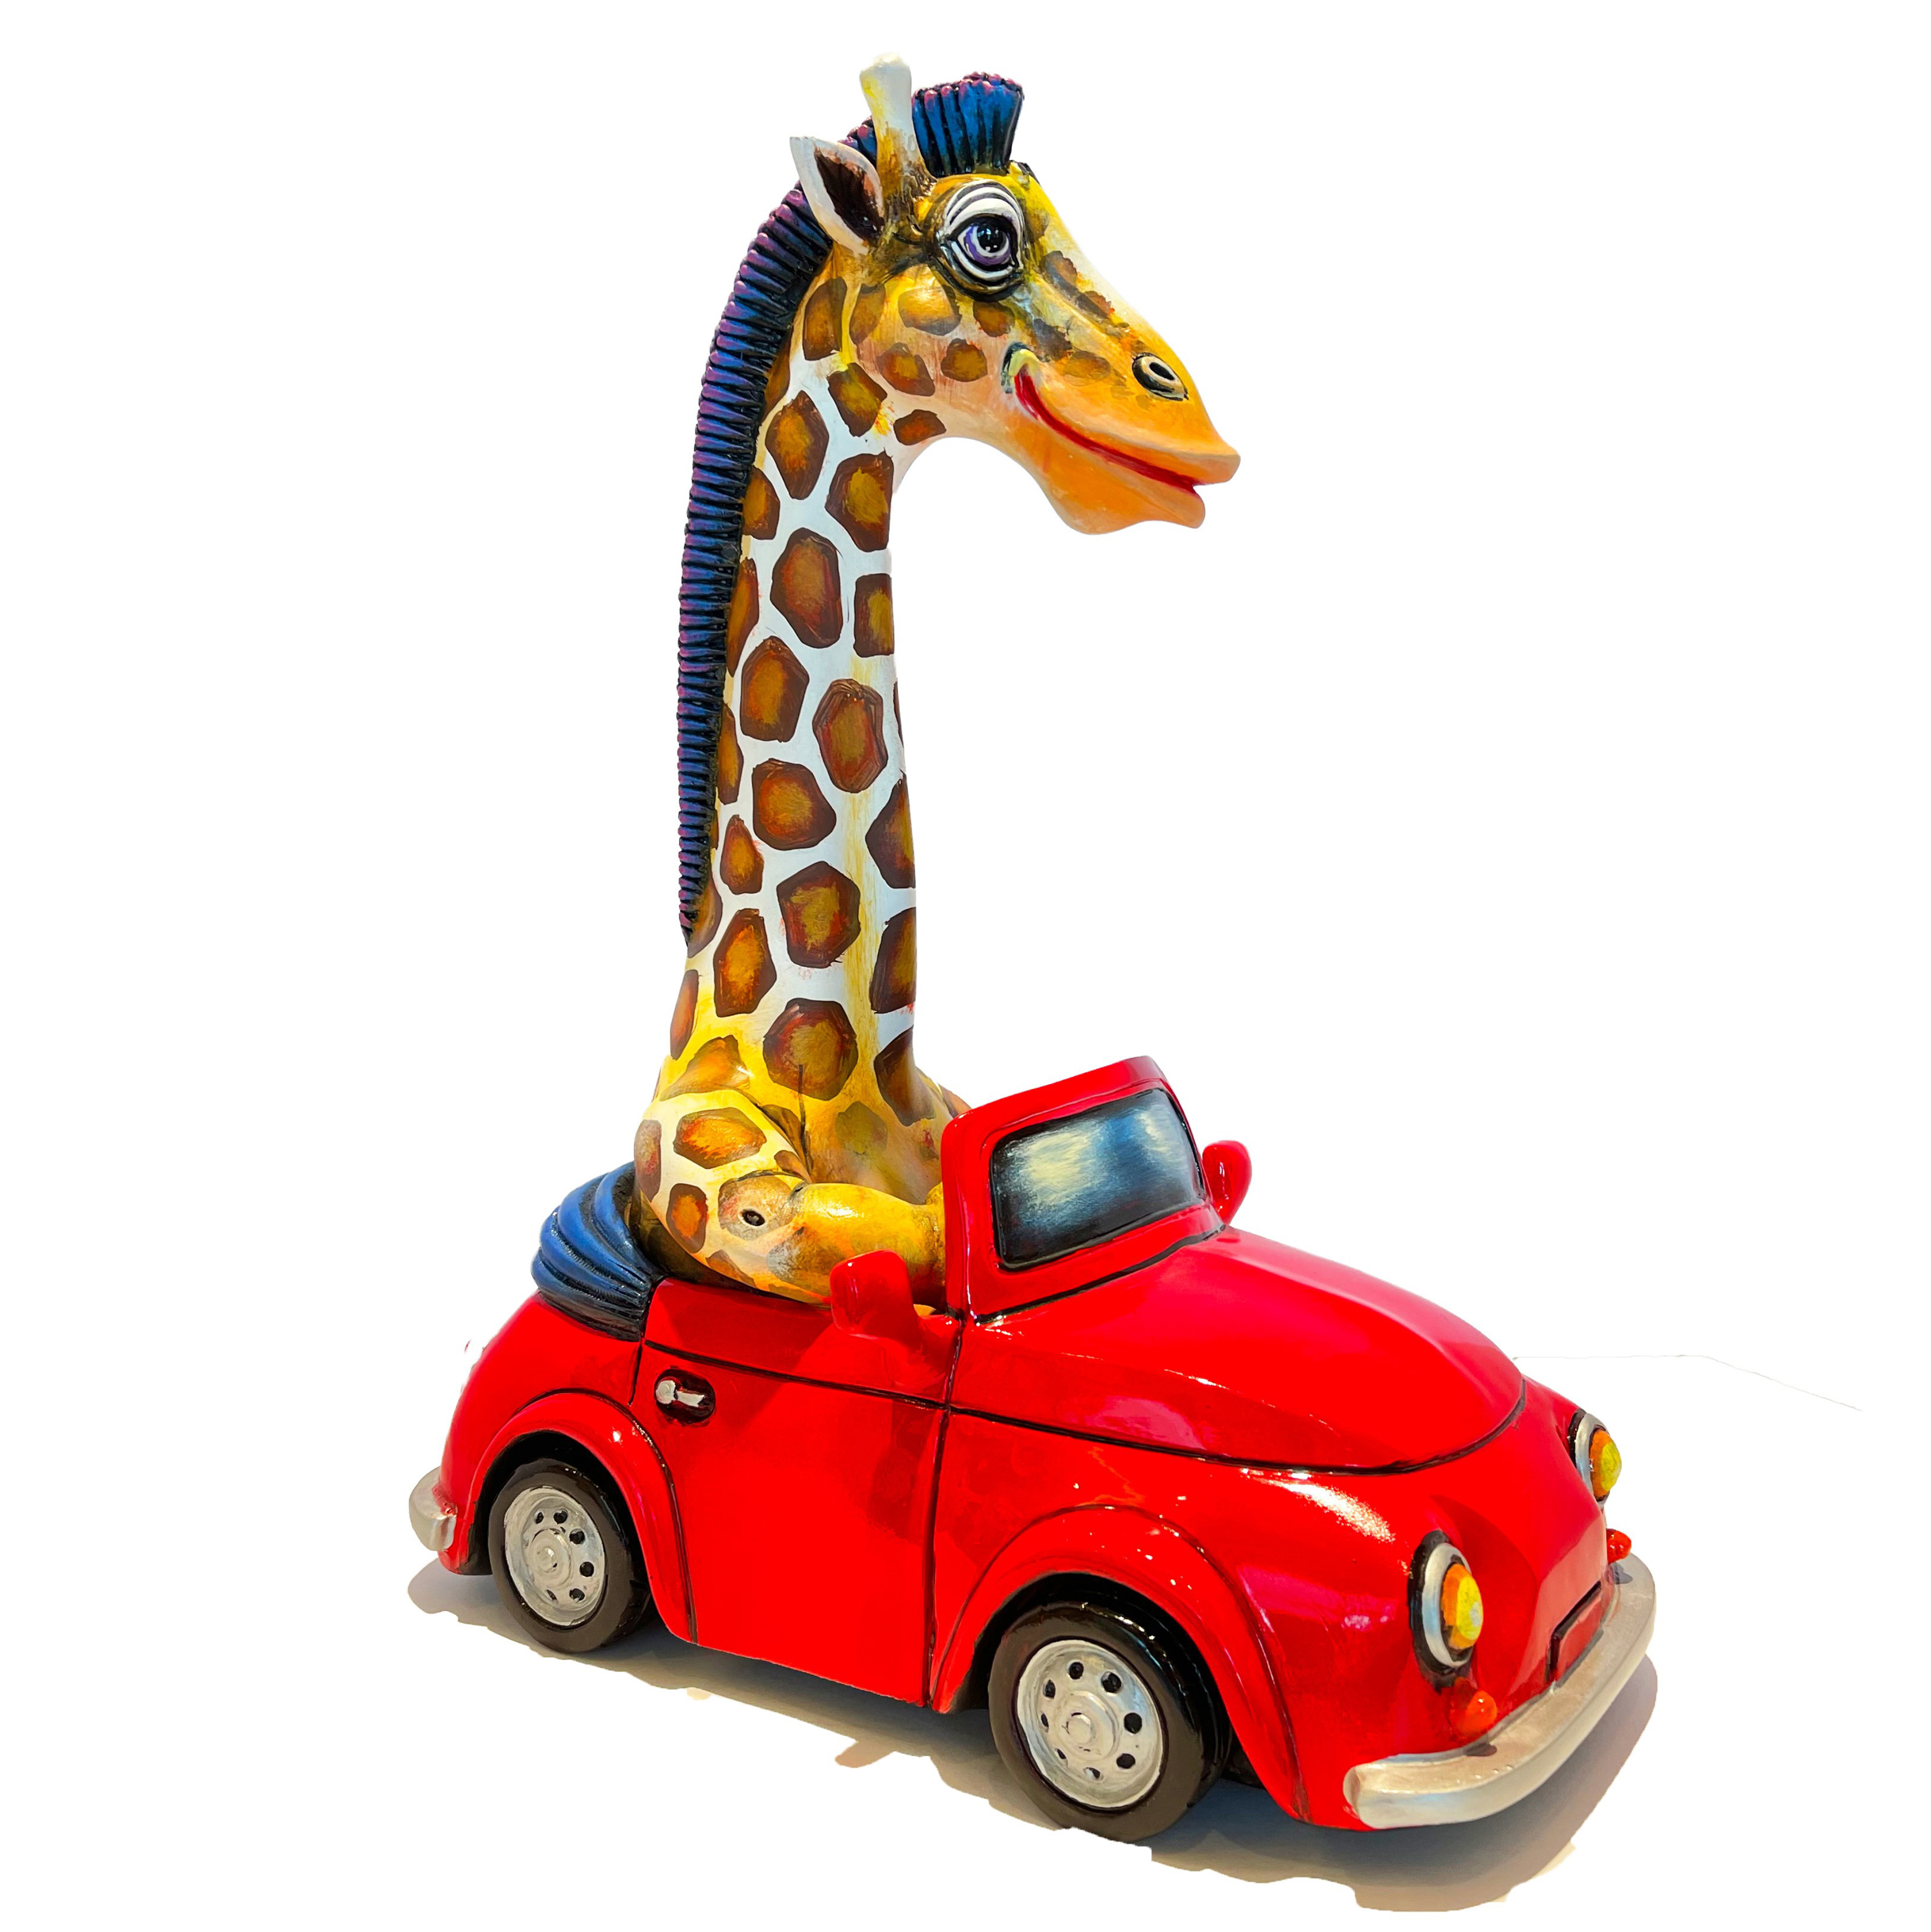 Signed, limited edition giraffe in car sculpture